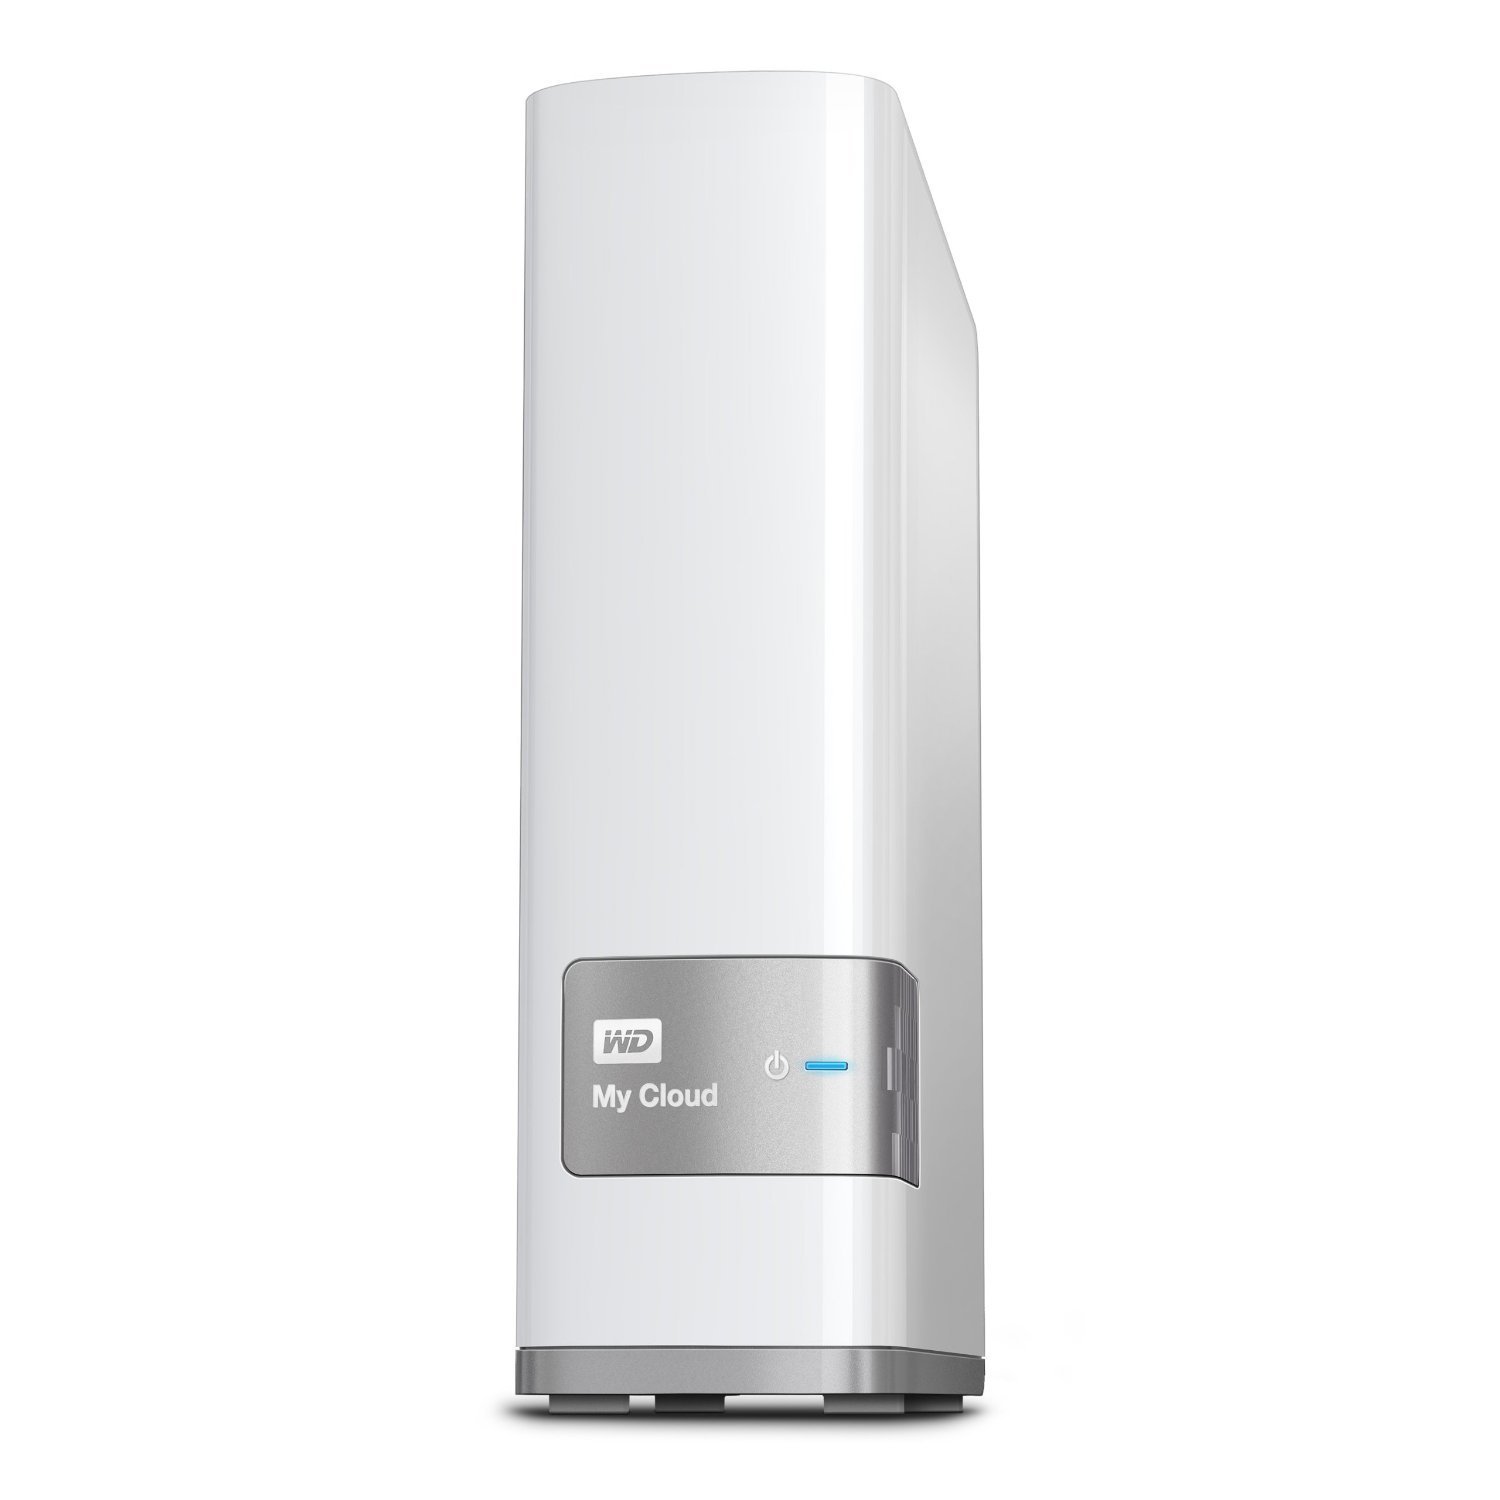 WD 4 TB MY CLOUD PERSONAL NETWORK ATTACHED STORAGE - NAS - WDBCTL0040HWT-NESN